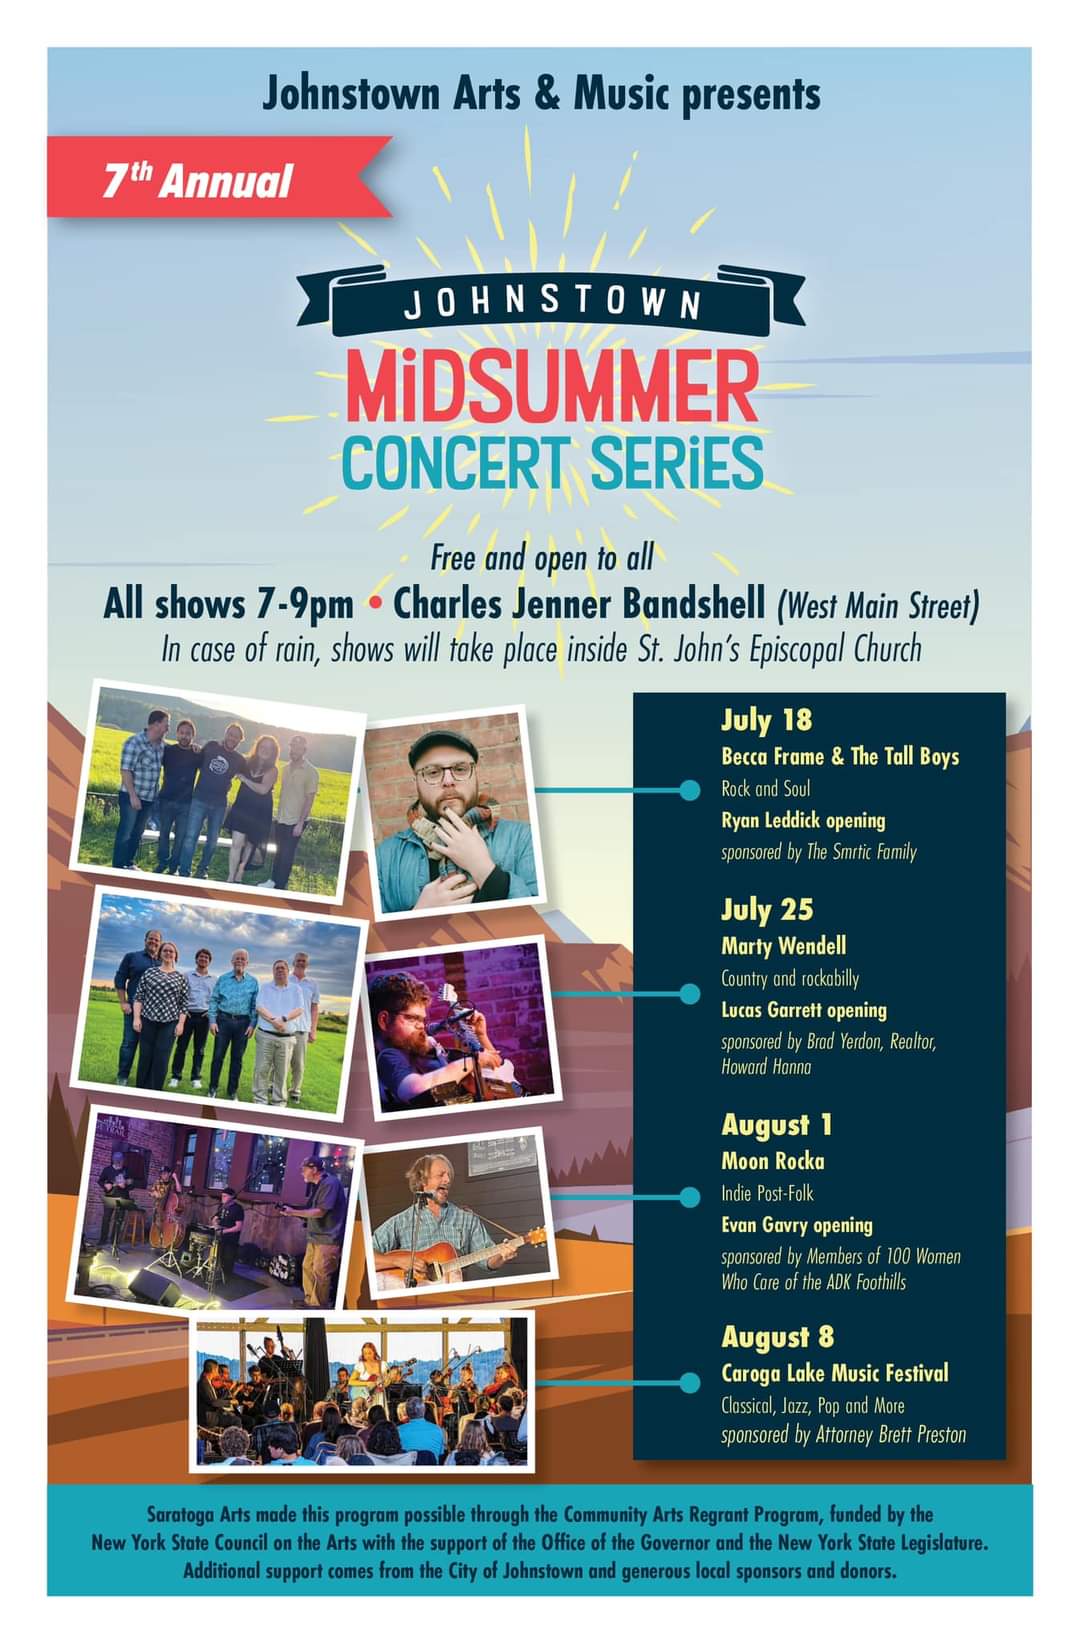 Johnstown Arts & Music presents this summer’s JOHNSTOWN MIDSUMMER CONCERT SERIES with all shows from 7-9pm. Free for all.